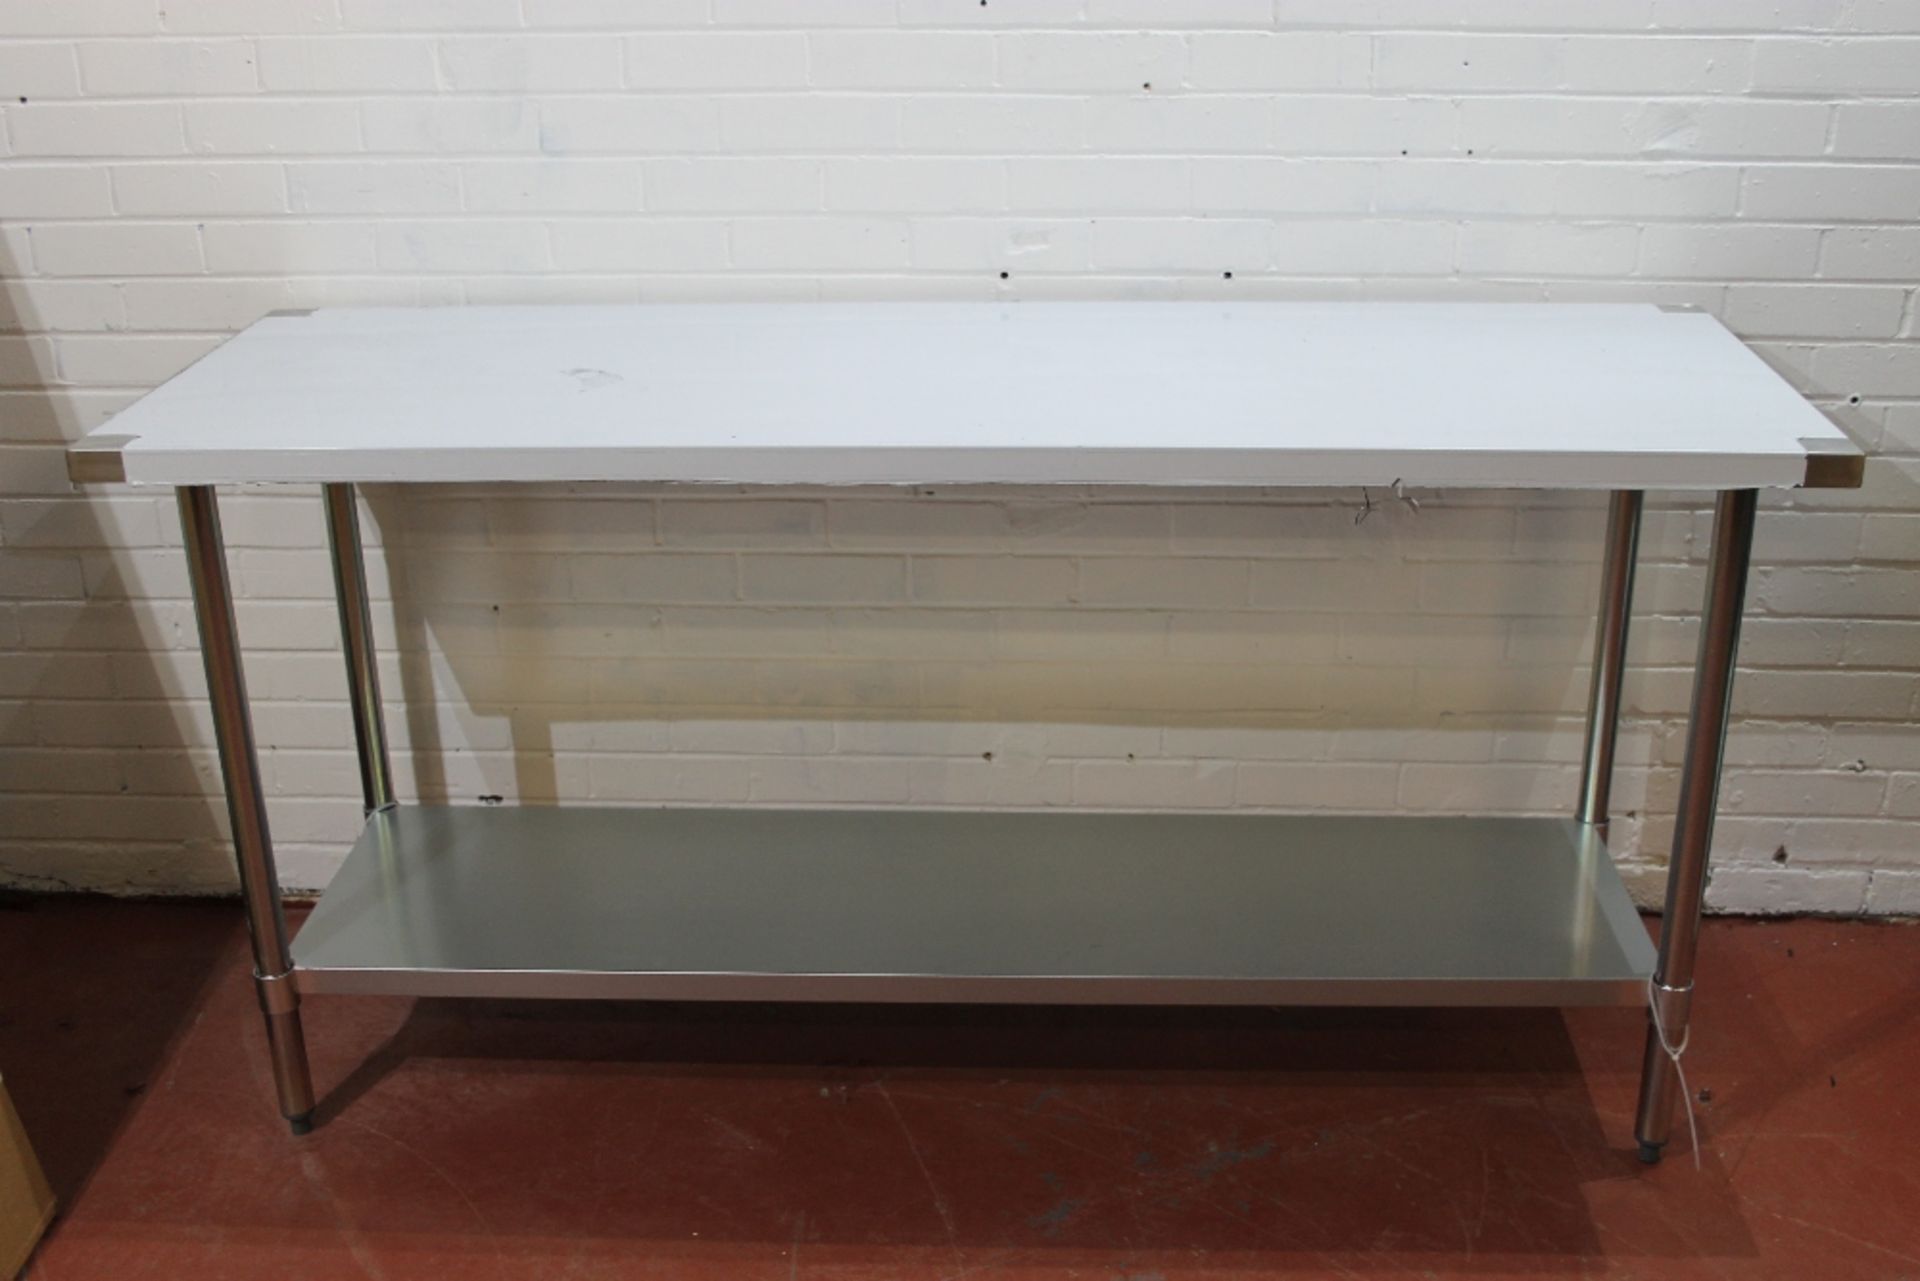 New Stainless Steel Table – Boxed – 1800 x 600 mm